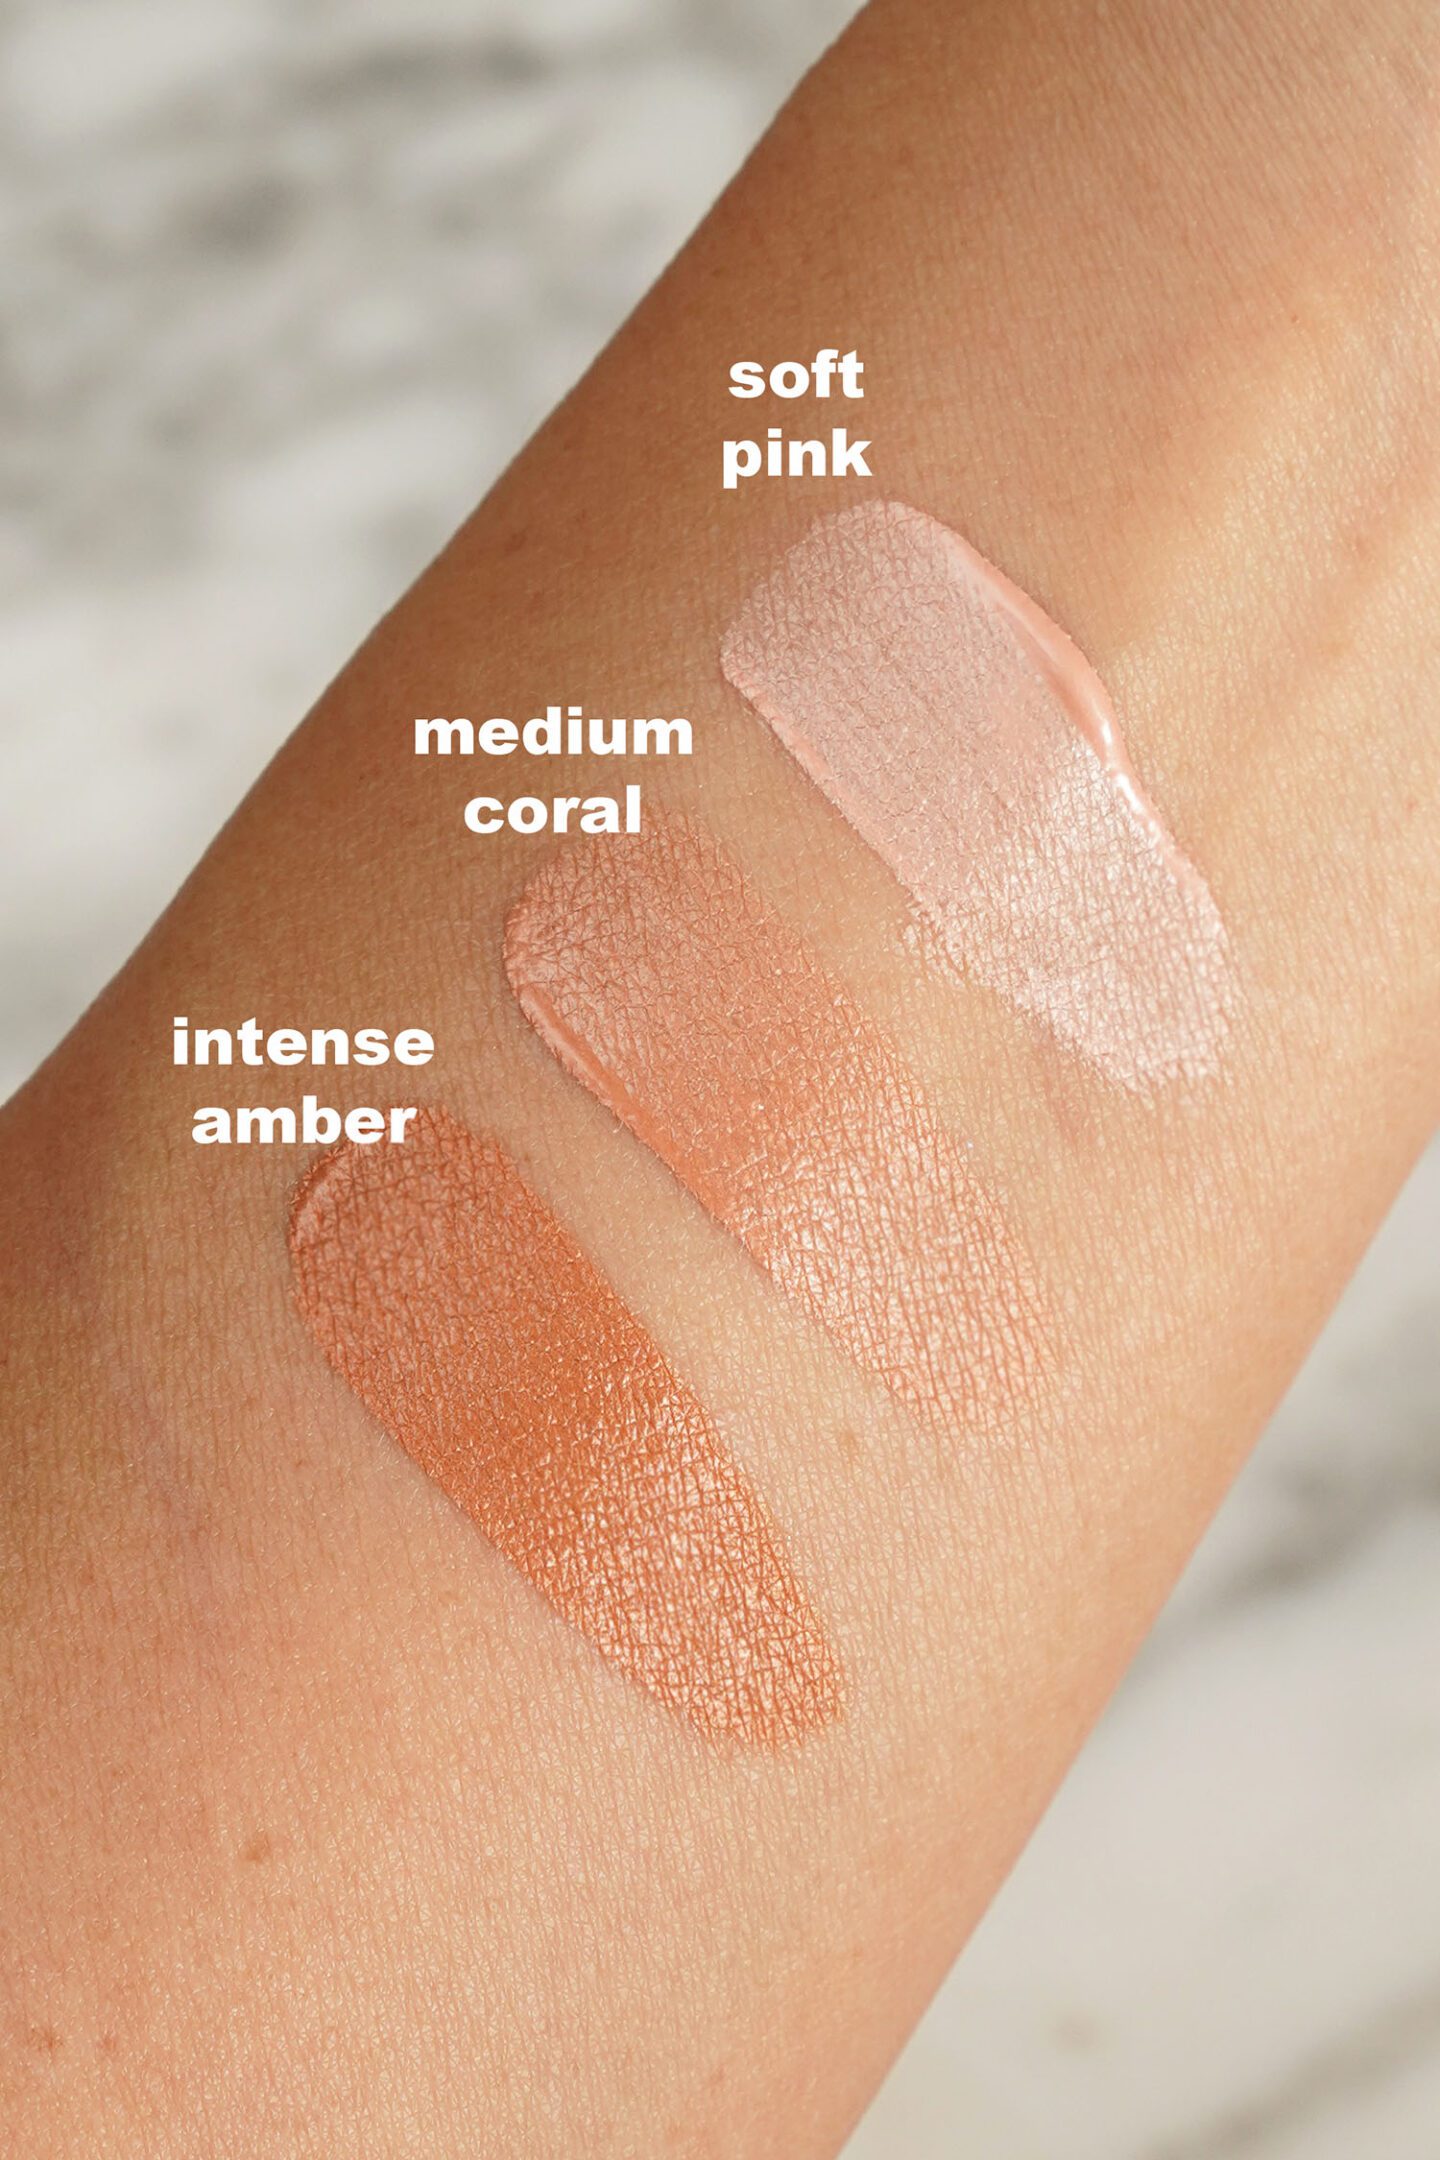 No 1 de Chanel Skin Enhancer Swatches Soft Pink and Medium Coral and Intense Amber